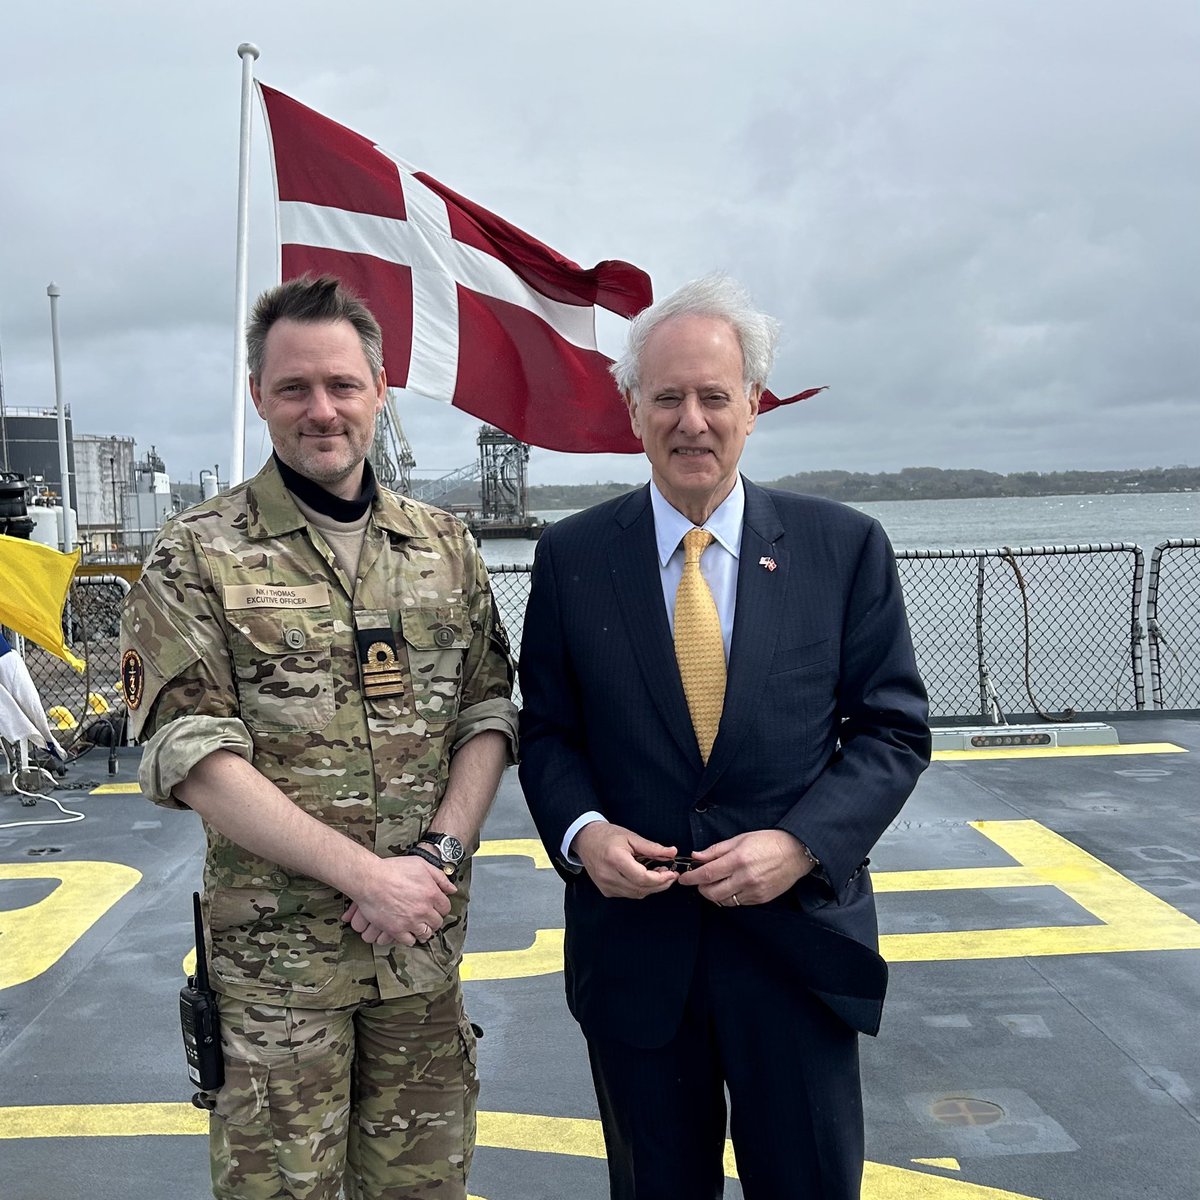 Thank you to the crew of the Peter Willemoes for the opportunity to tour your impressive ship in Fredericia as part of ACTION24.